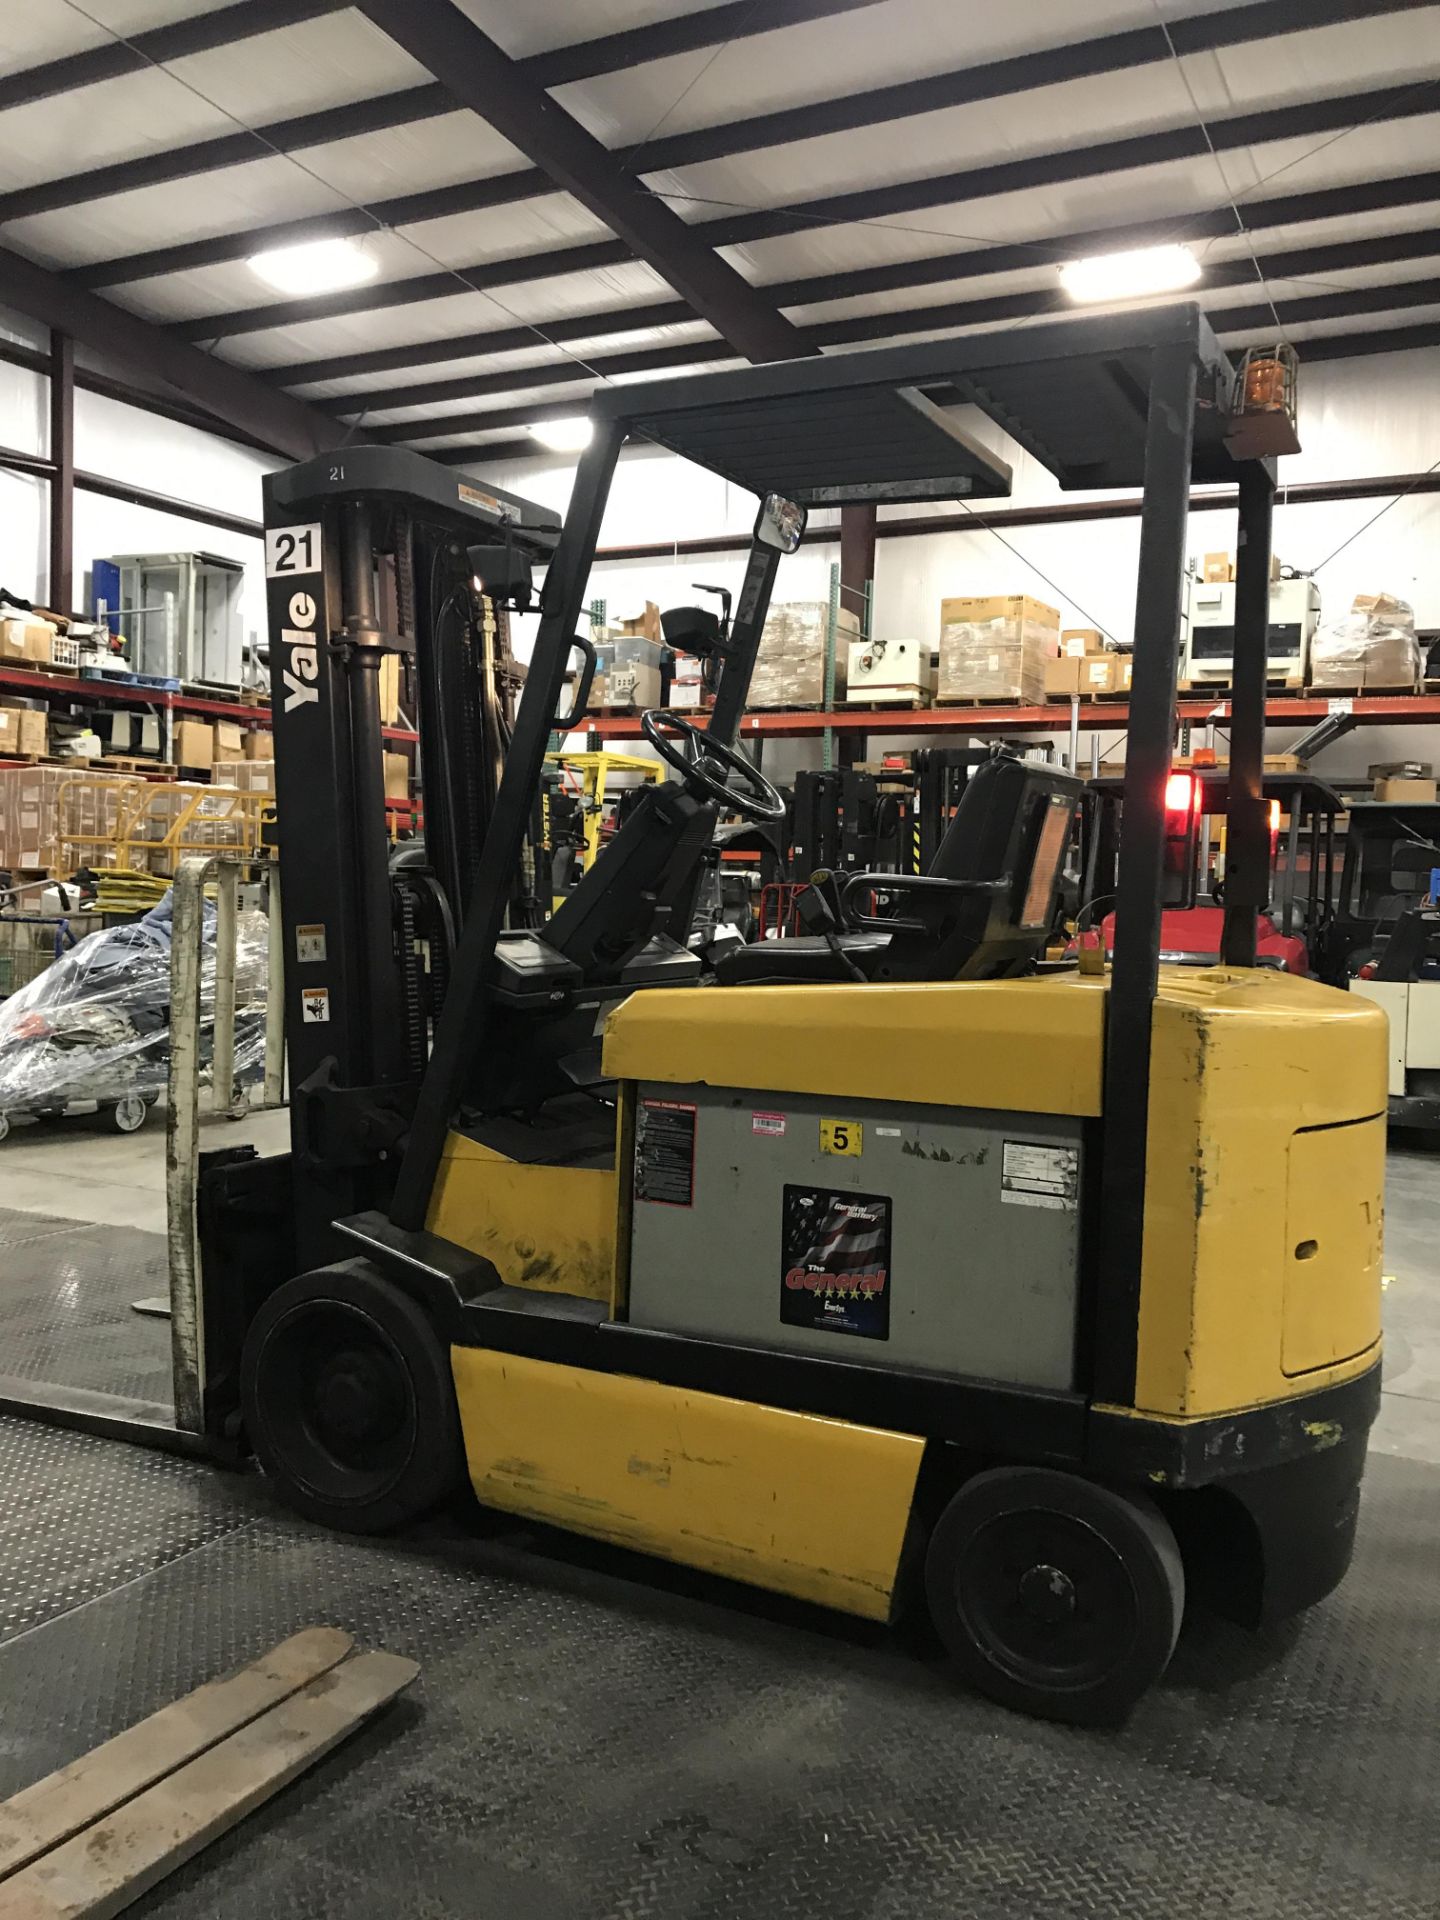 SEE VIDEO** YALE ELECTRIC FORKLIFT, 6,000 LB CAP.